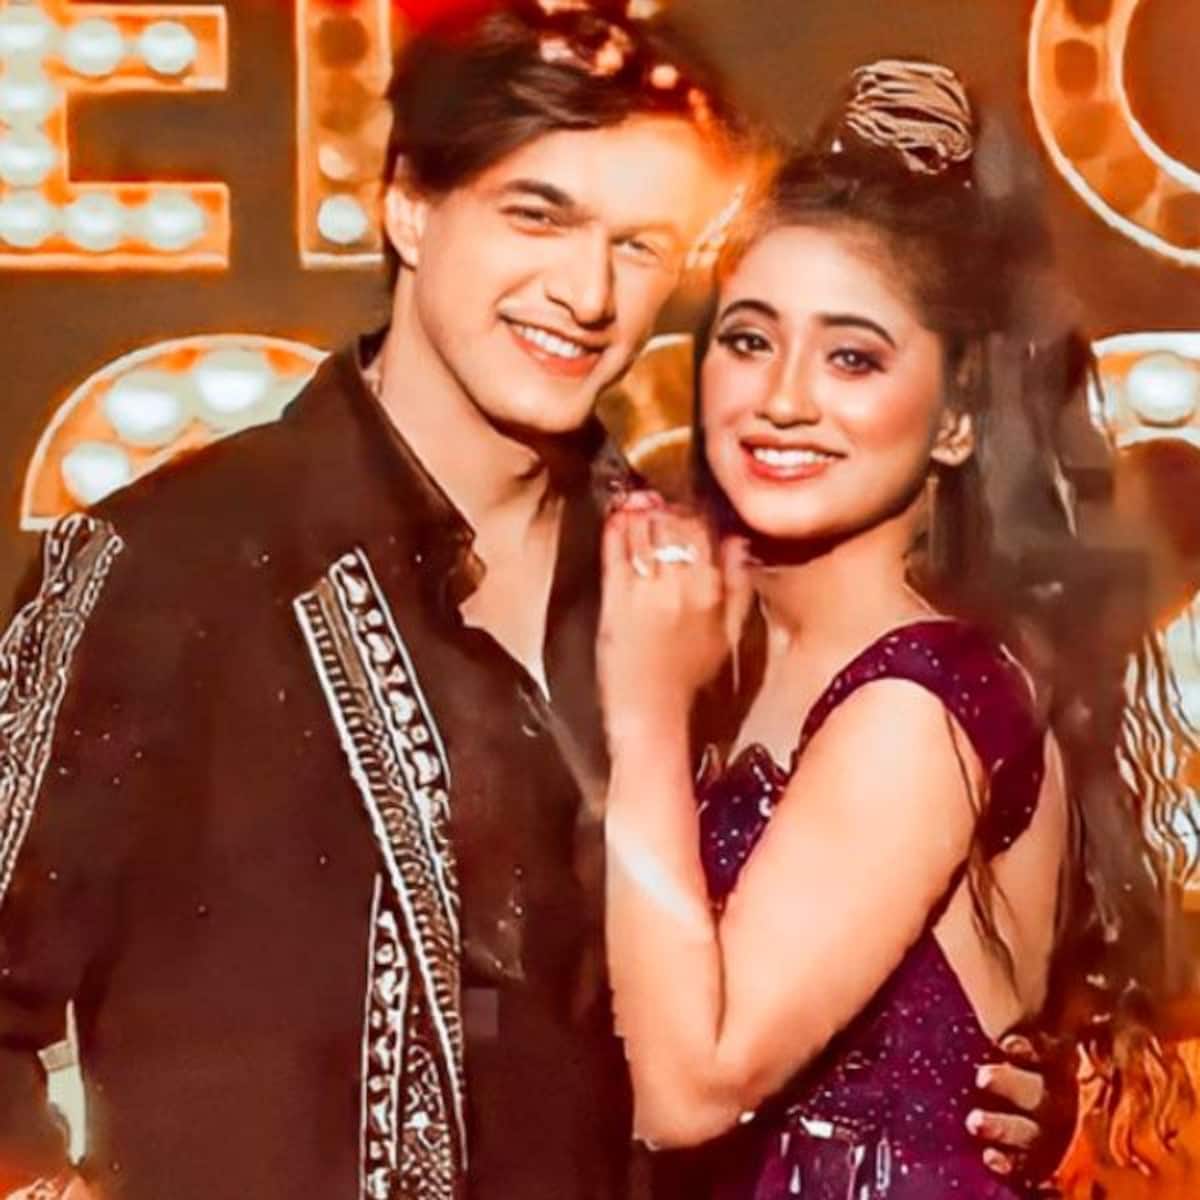 Yeh Rishta Kya Kehlata Hai: Mohsin Khan and Shivangi Joshi's look from the New Year special show leaves us excited for their dance performance